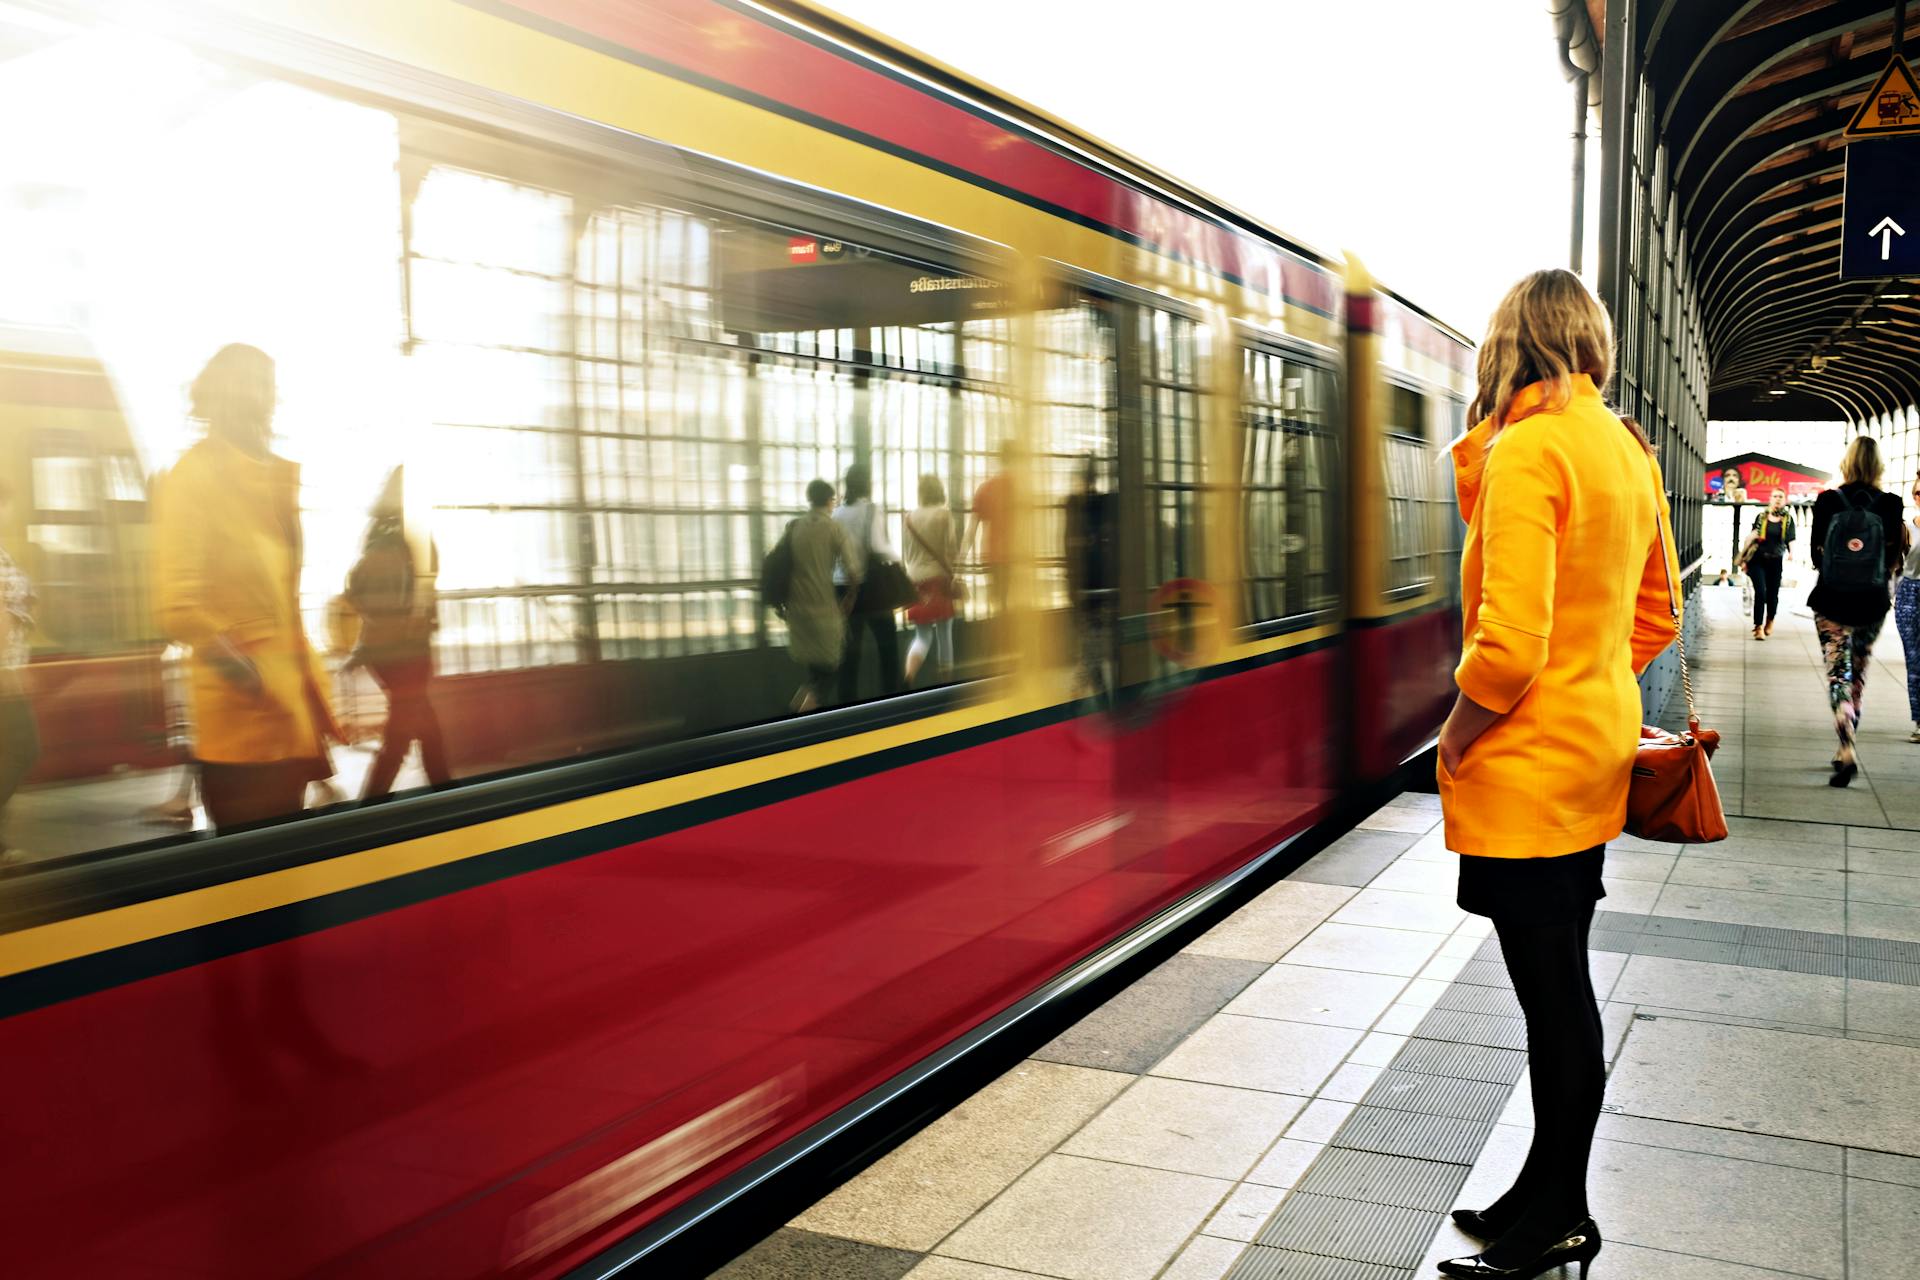 A woman standing beside a red train | Source: Pexels